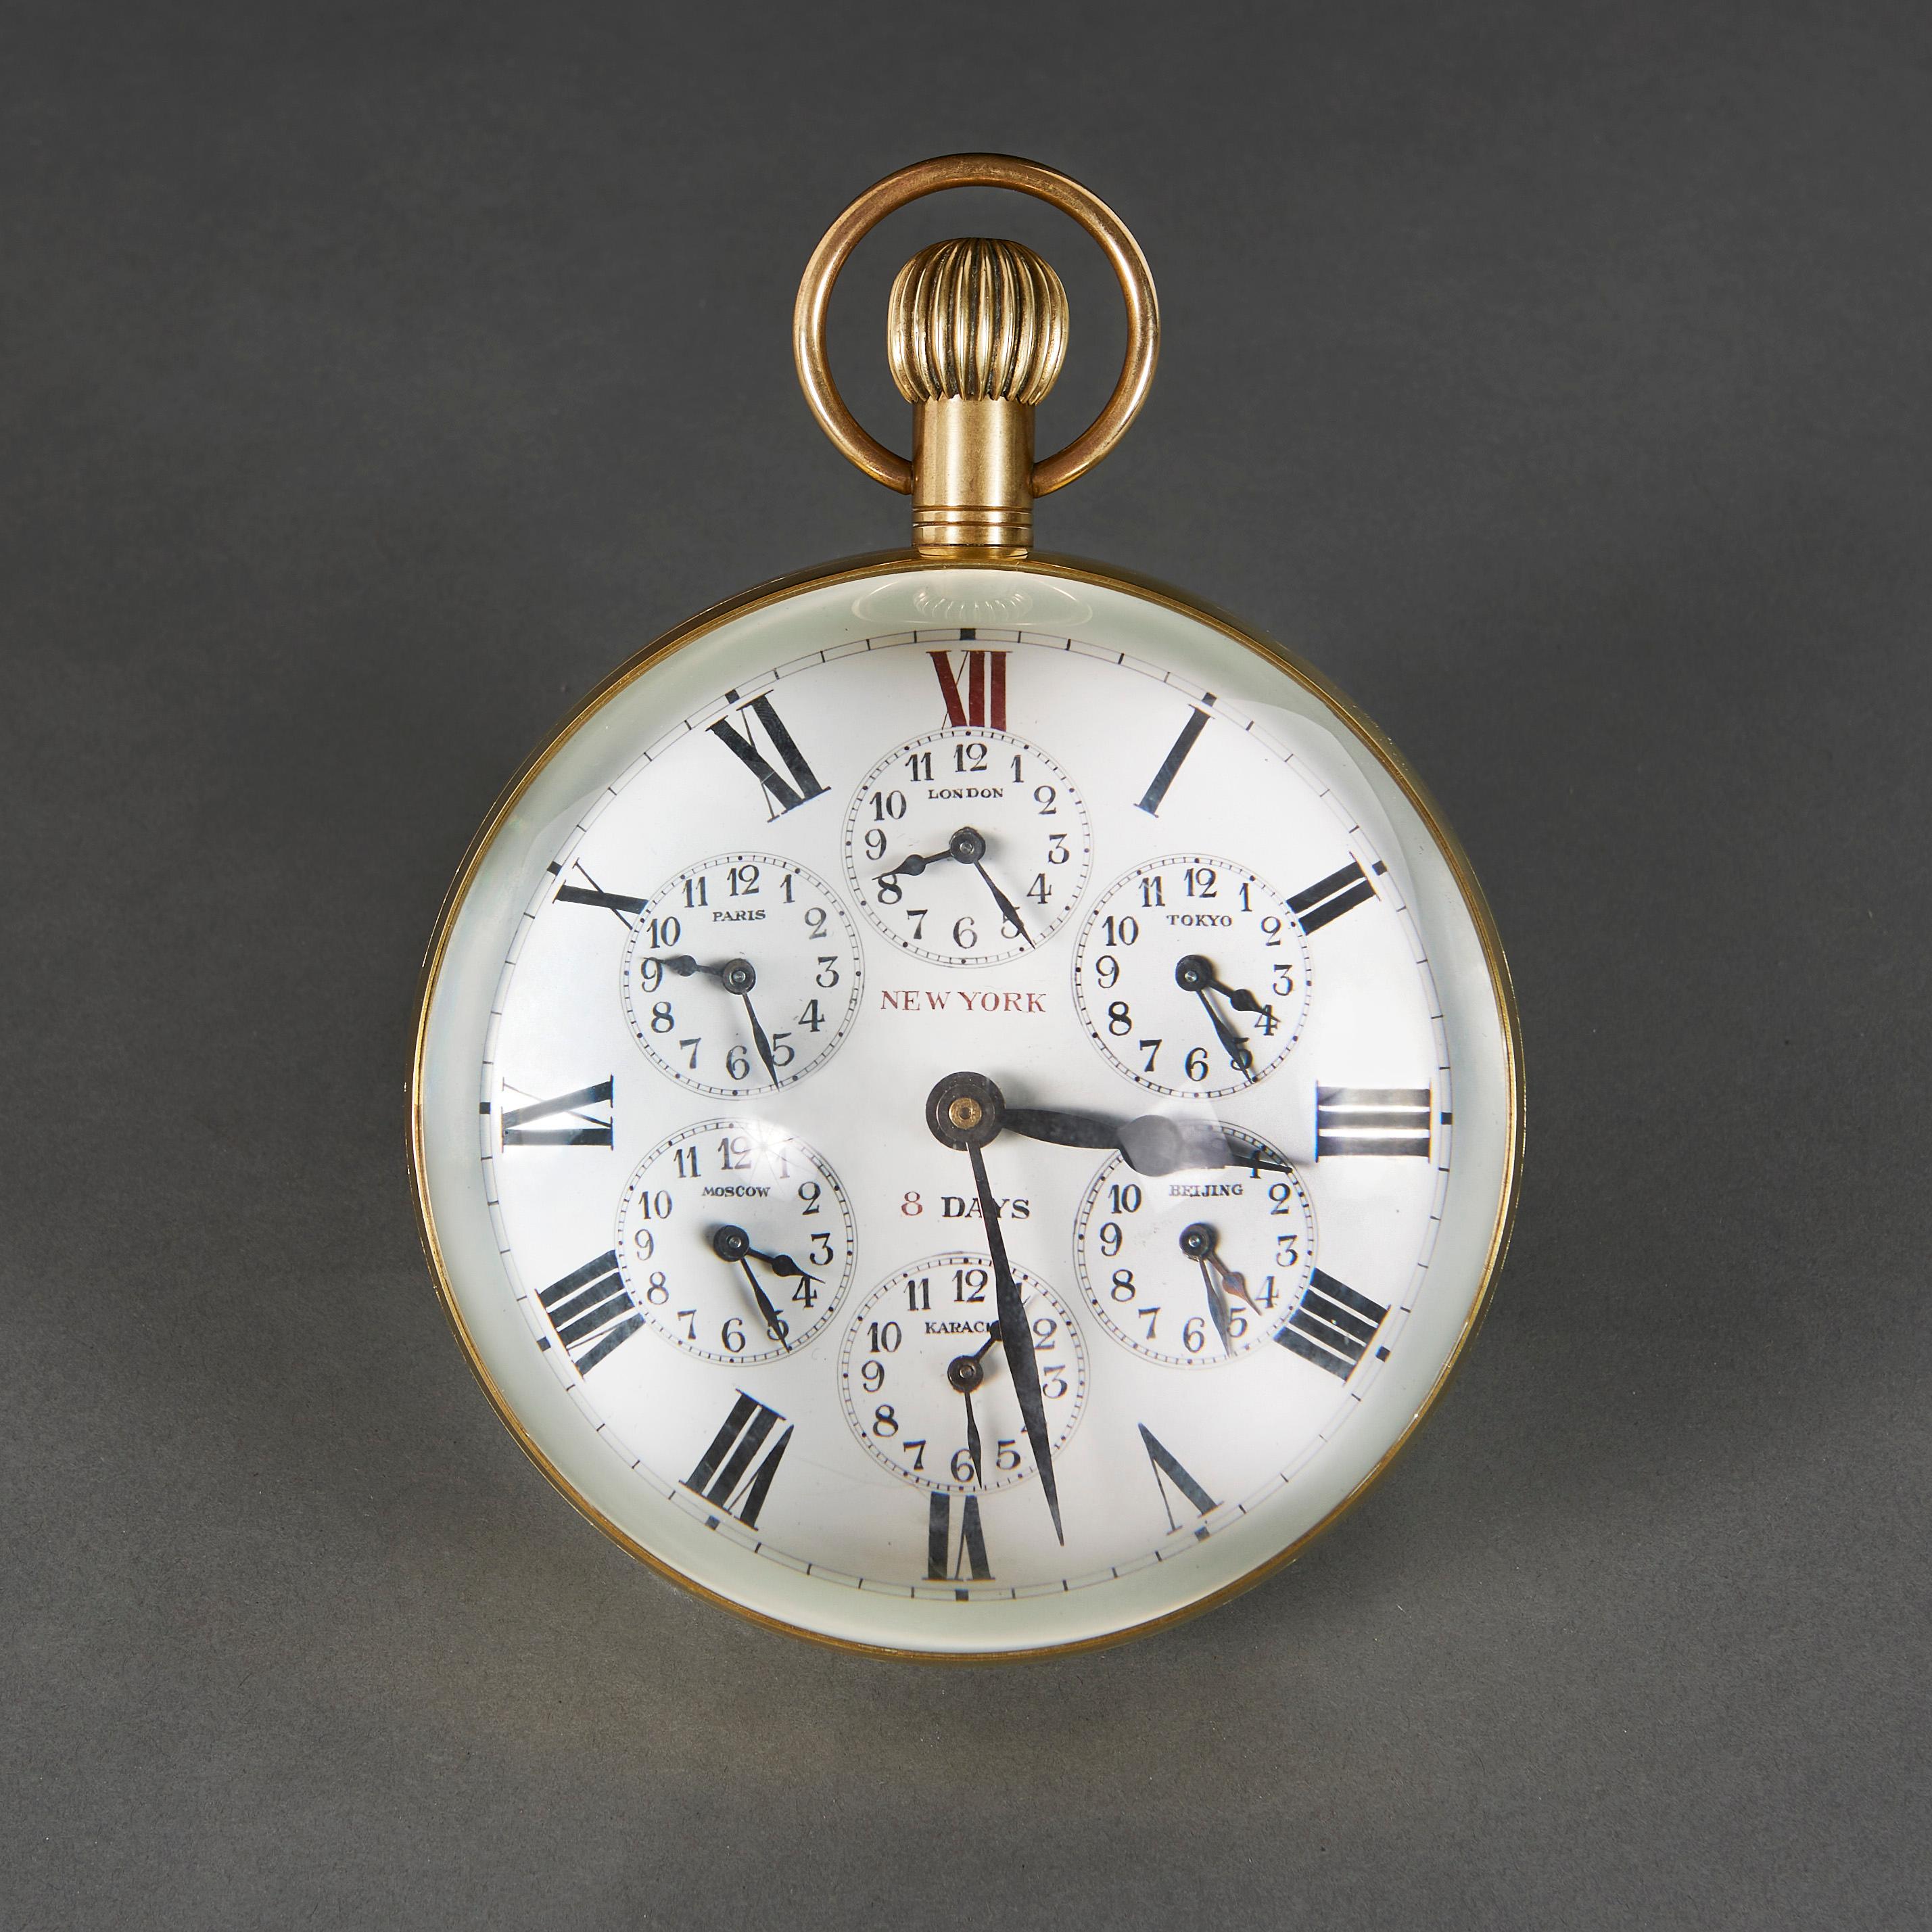 Elgin National Watch Company, Illinois, USA, early 20th century

A Fine giant ball desk clock in brass and glass, the dial with six subsidiary dials for London, Paris, Tokyo, Moscow, Karachi and Beijing, with eight day American movement by Elgin